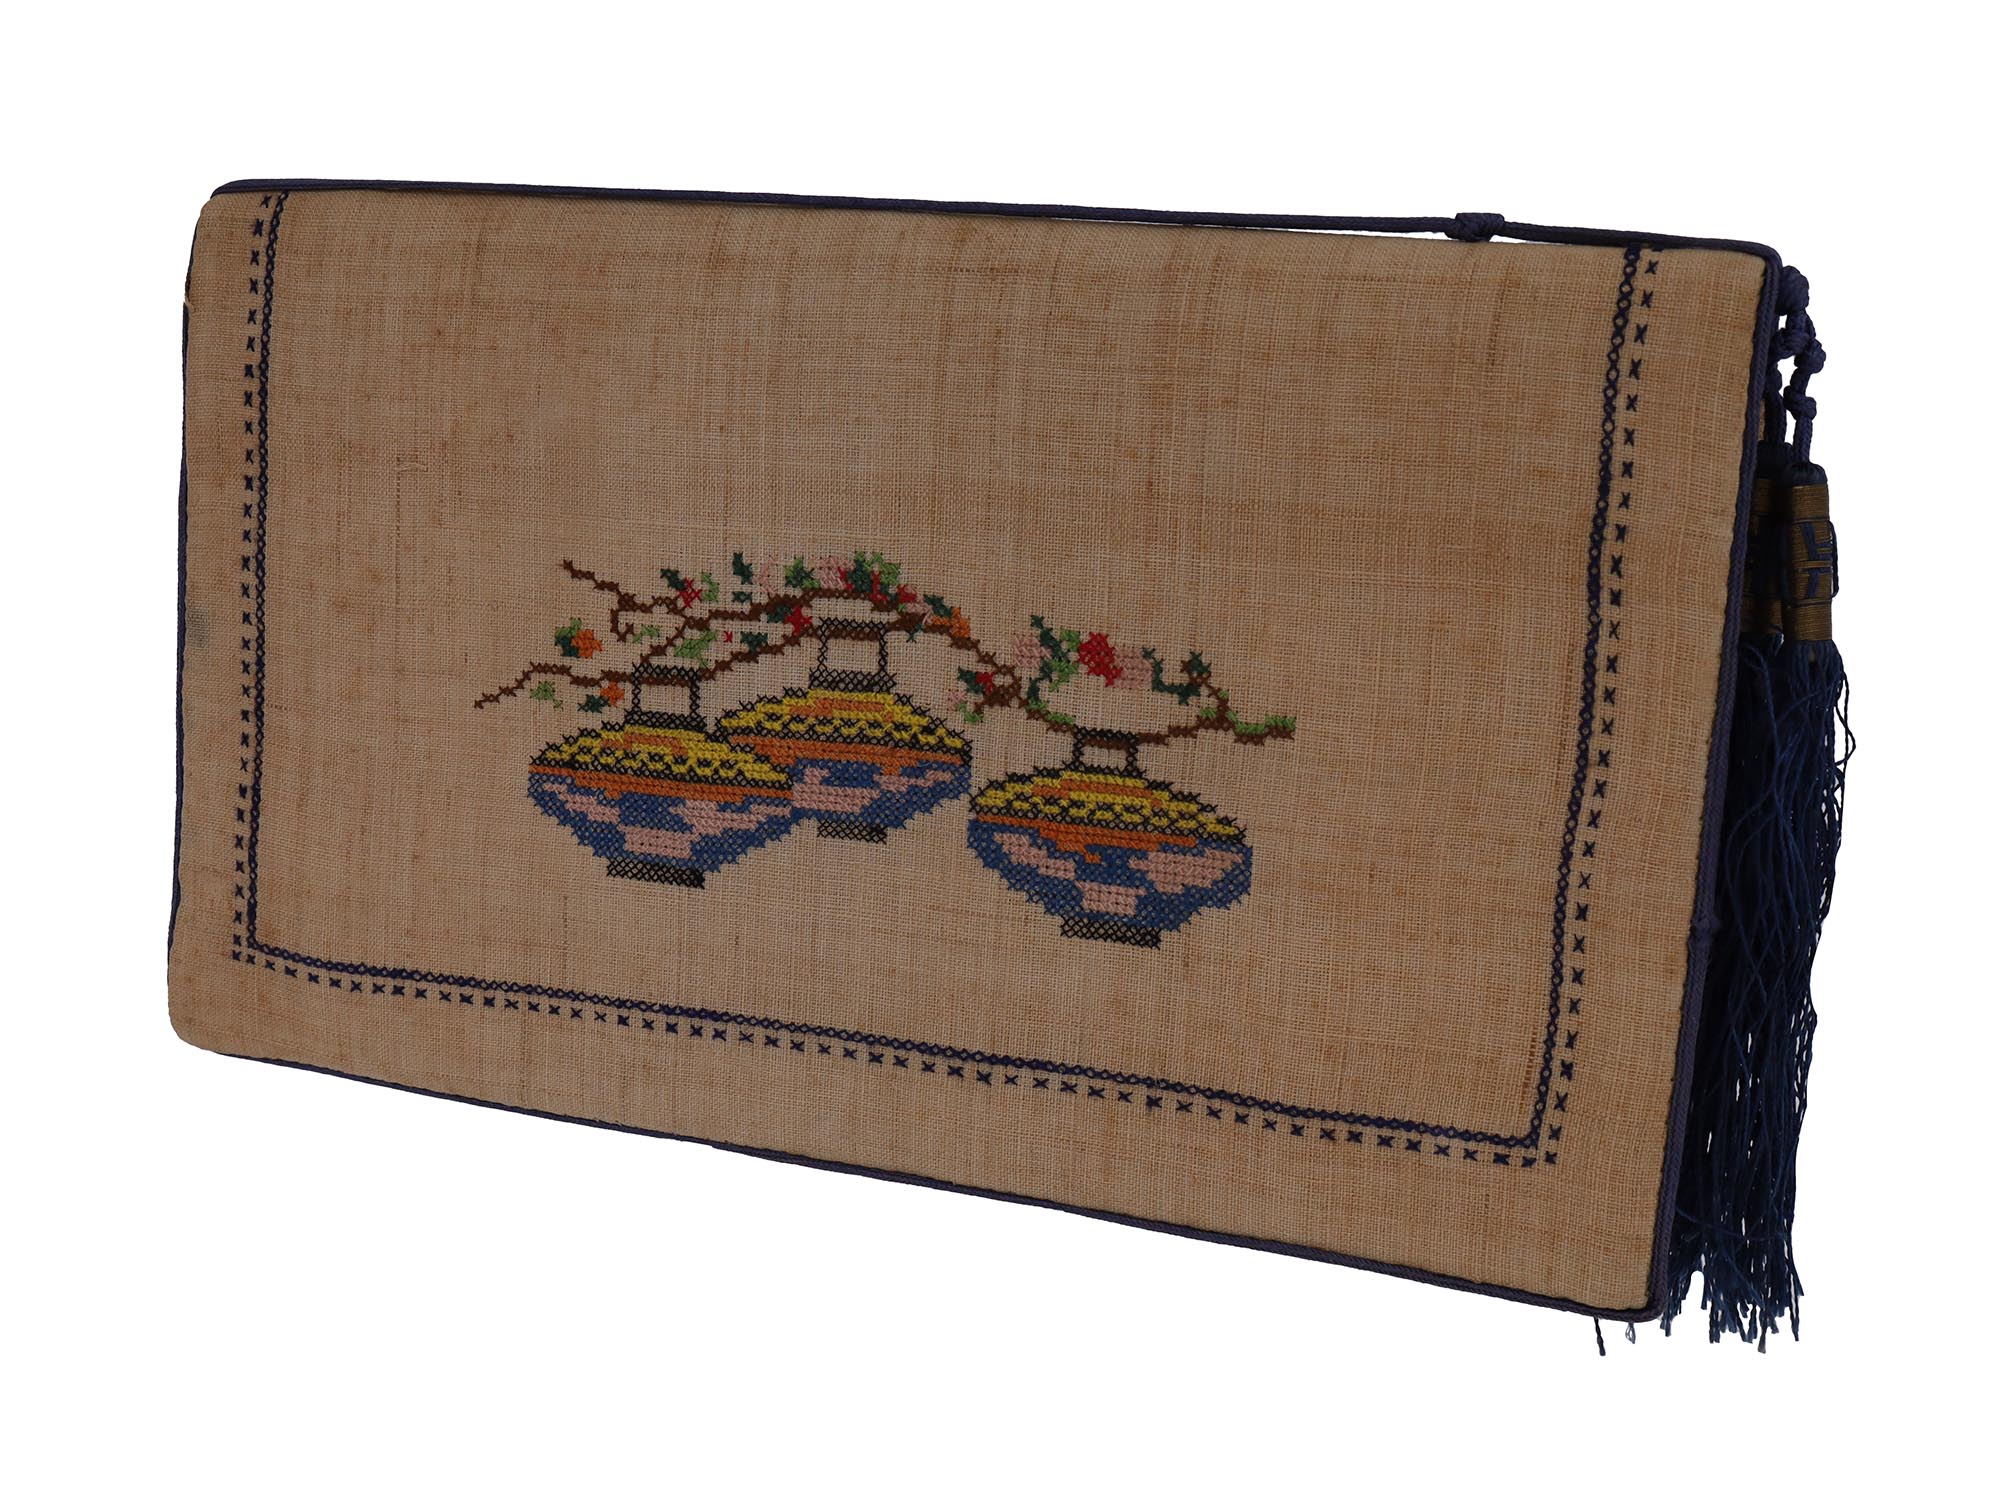 MID CENTURY HAND EMBROIDERED CHINESE STYLE CLUTCH PIC-0